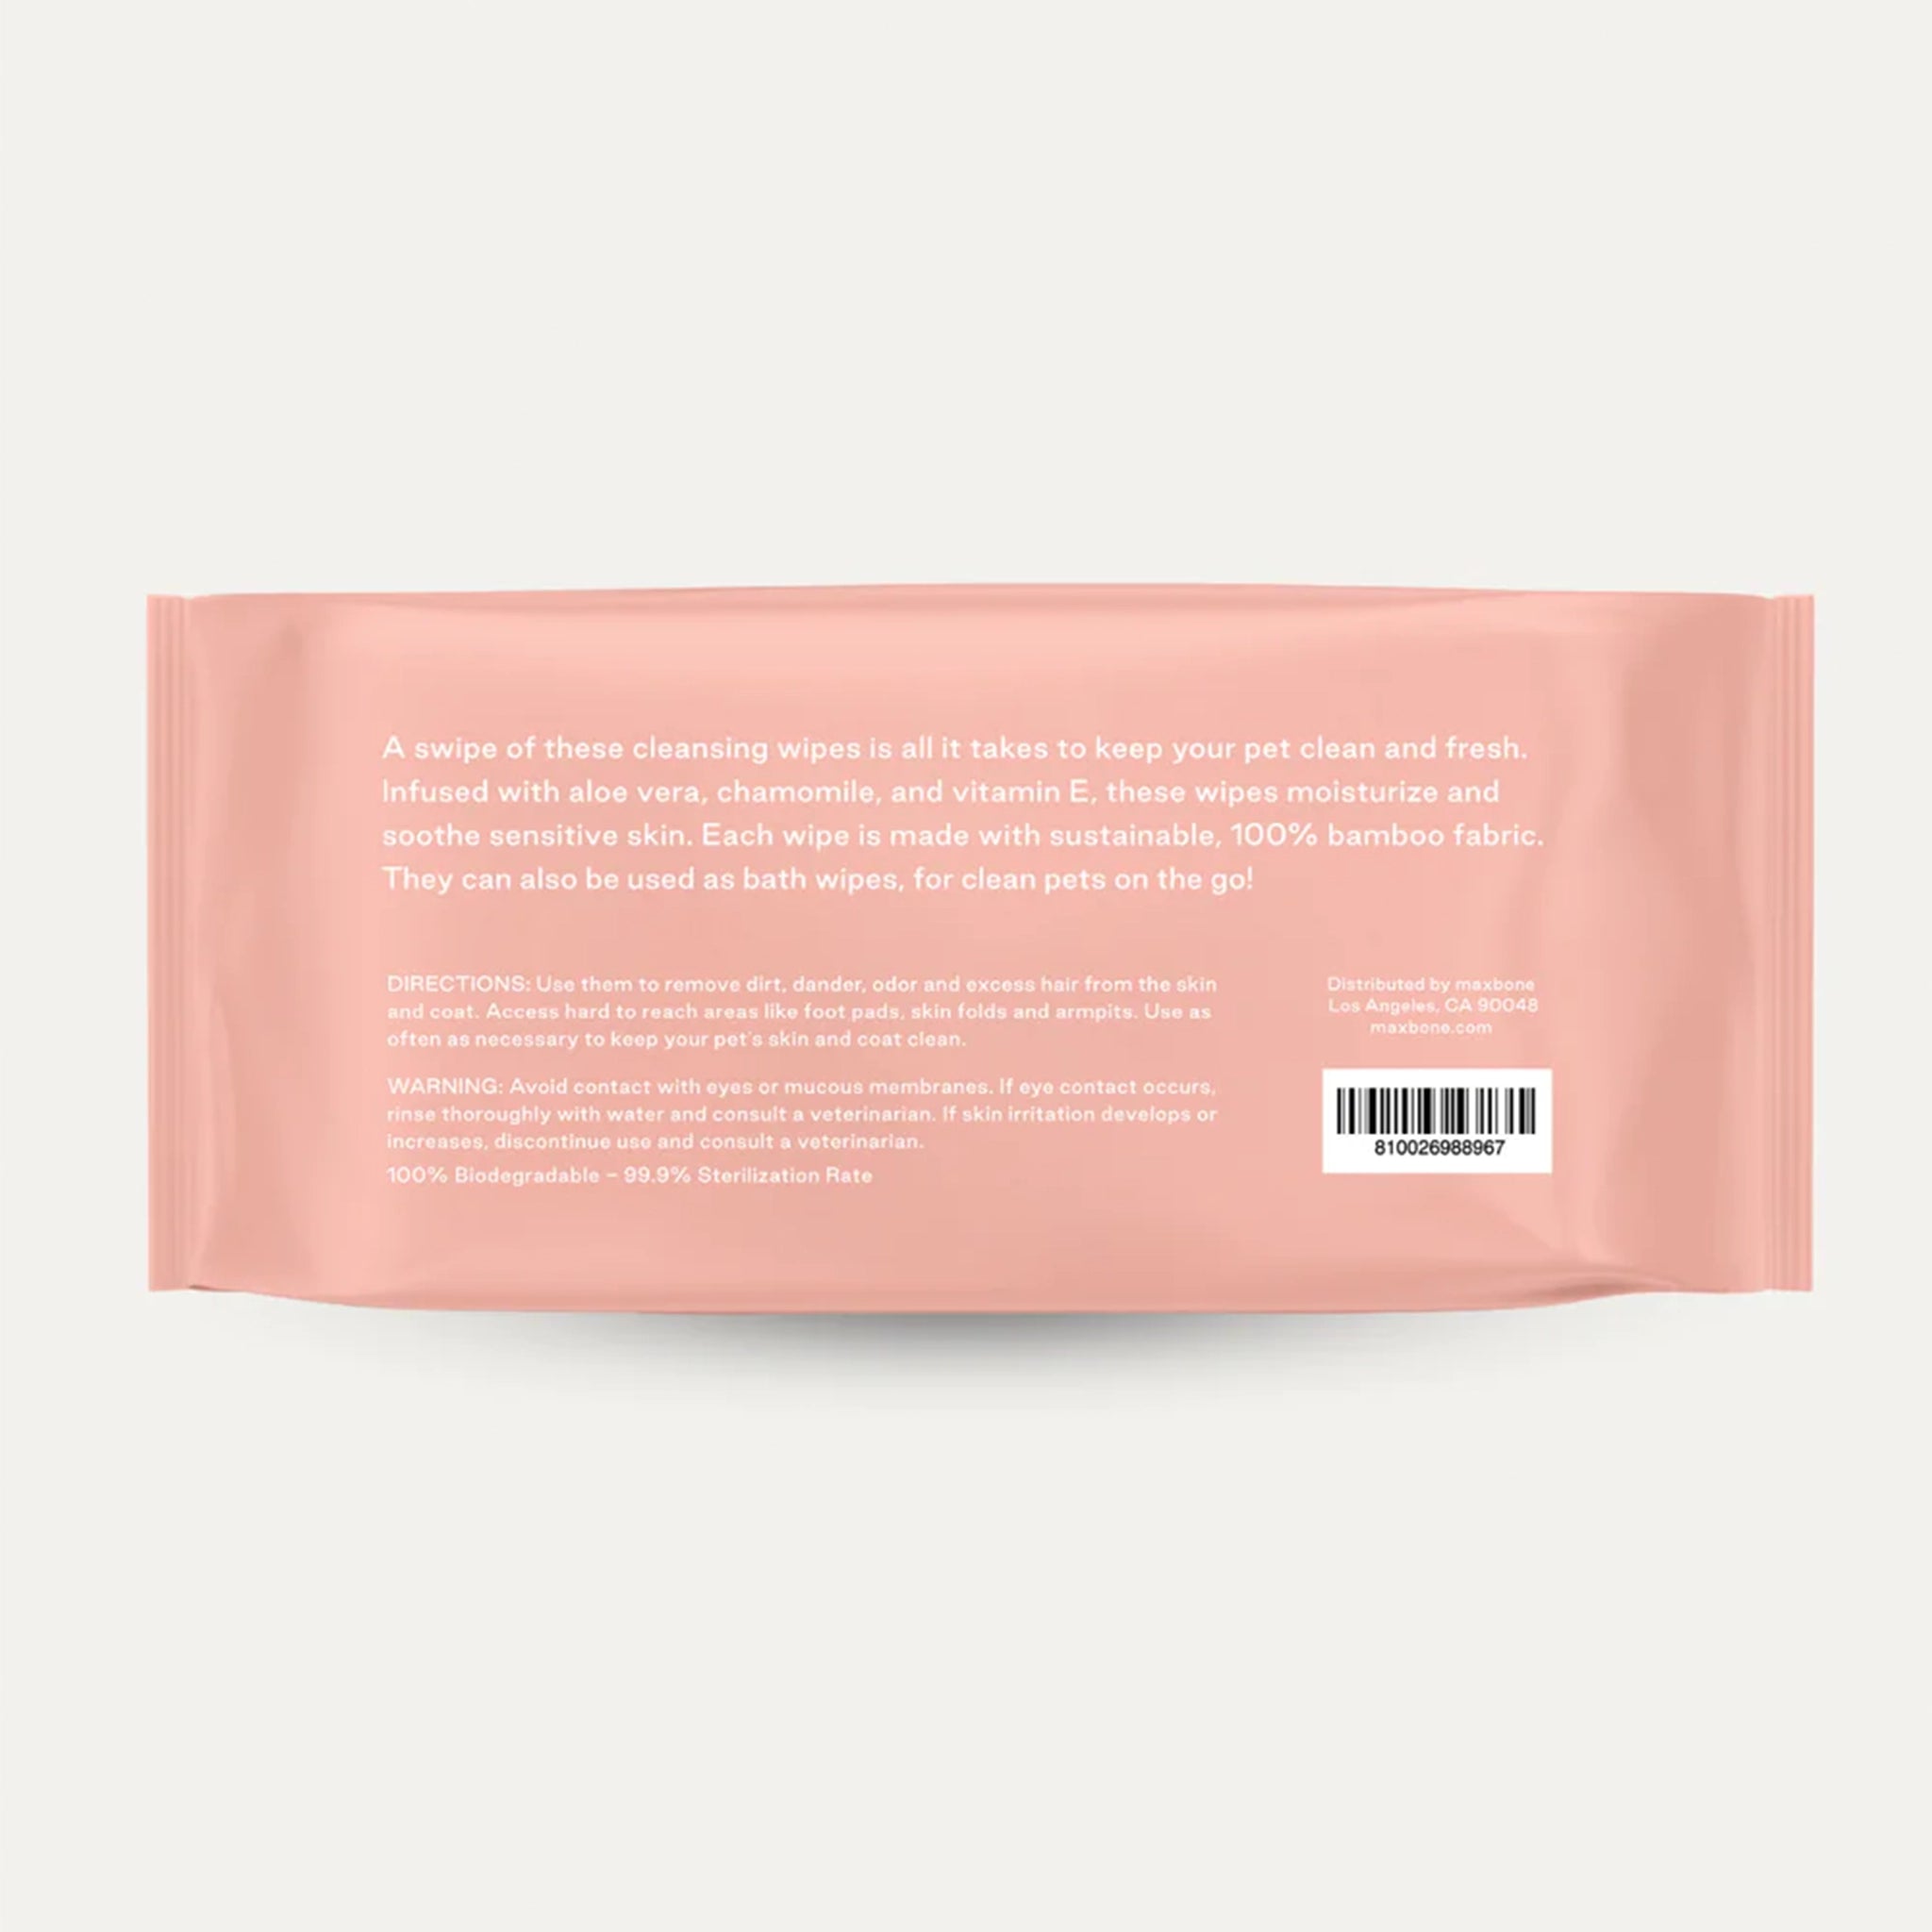 A pink bag of wet wipes with a resealable dispenser at the top along with words one the side that read, "Good for your dog. Good for the planet." in white text.